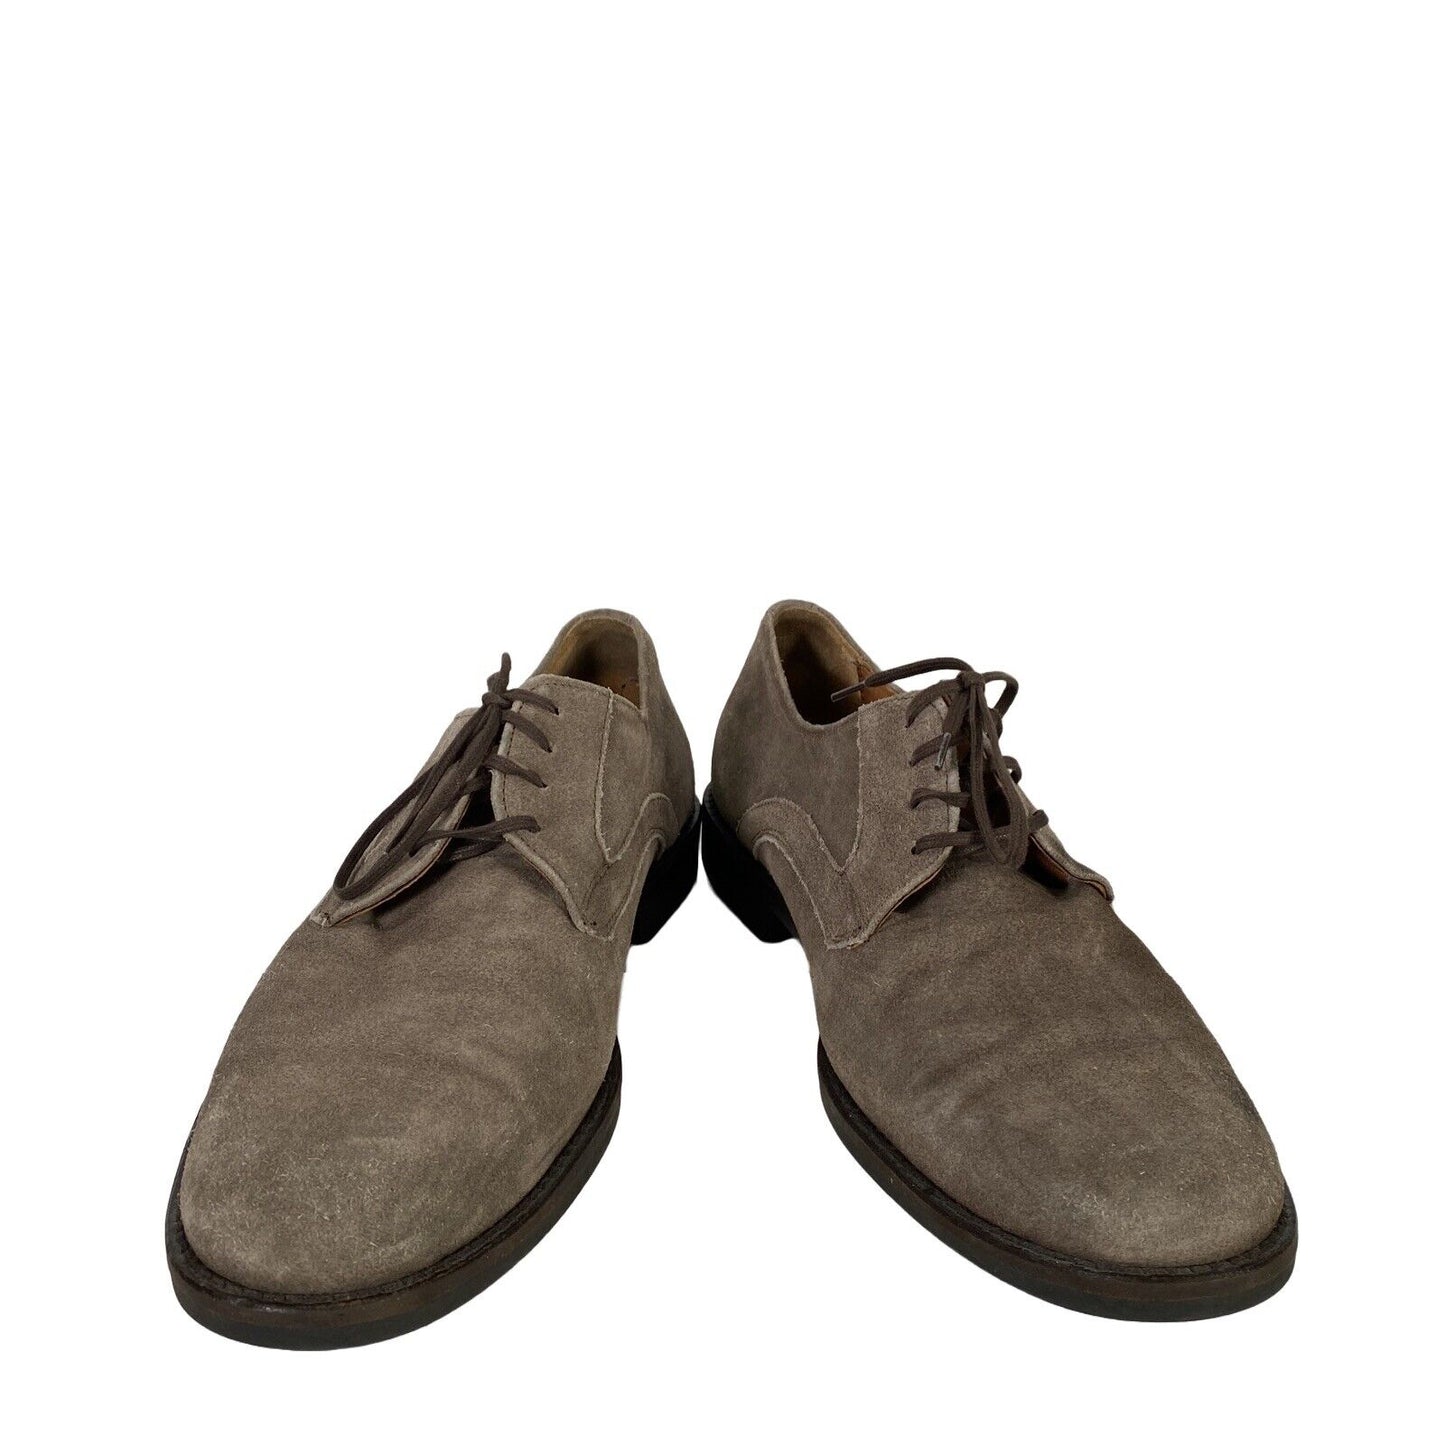 Johnston and Murphy Mens Gray Suede Headley Lace Up Oxford Dress Shoes -9